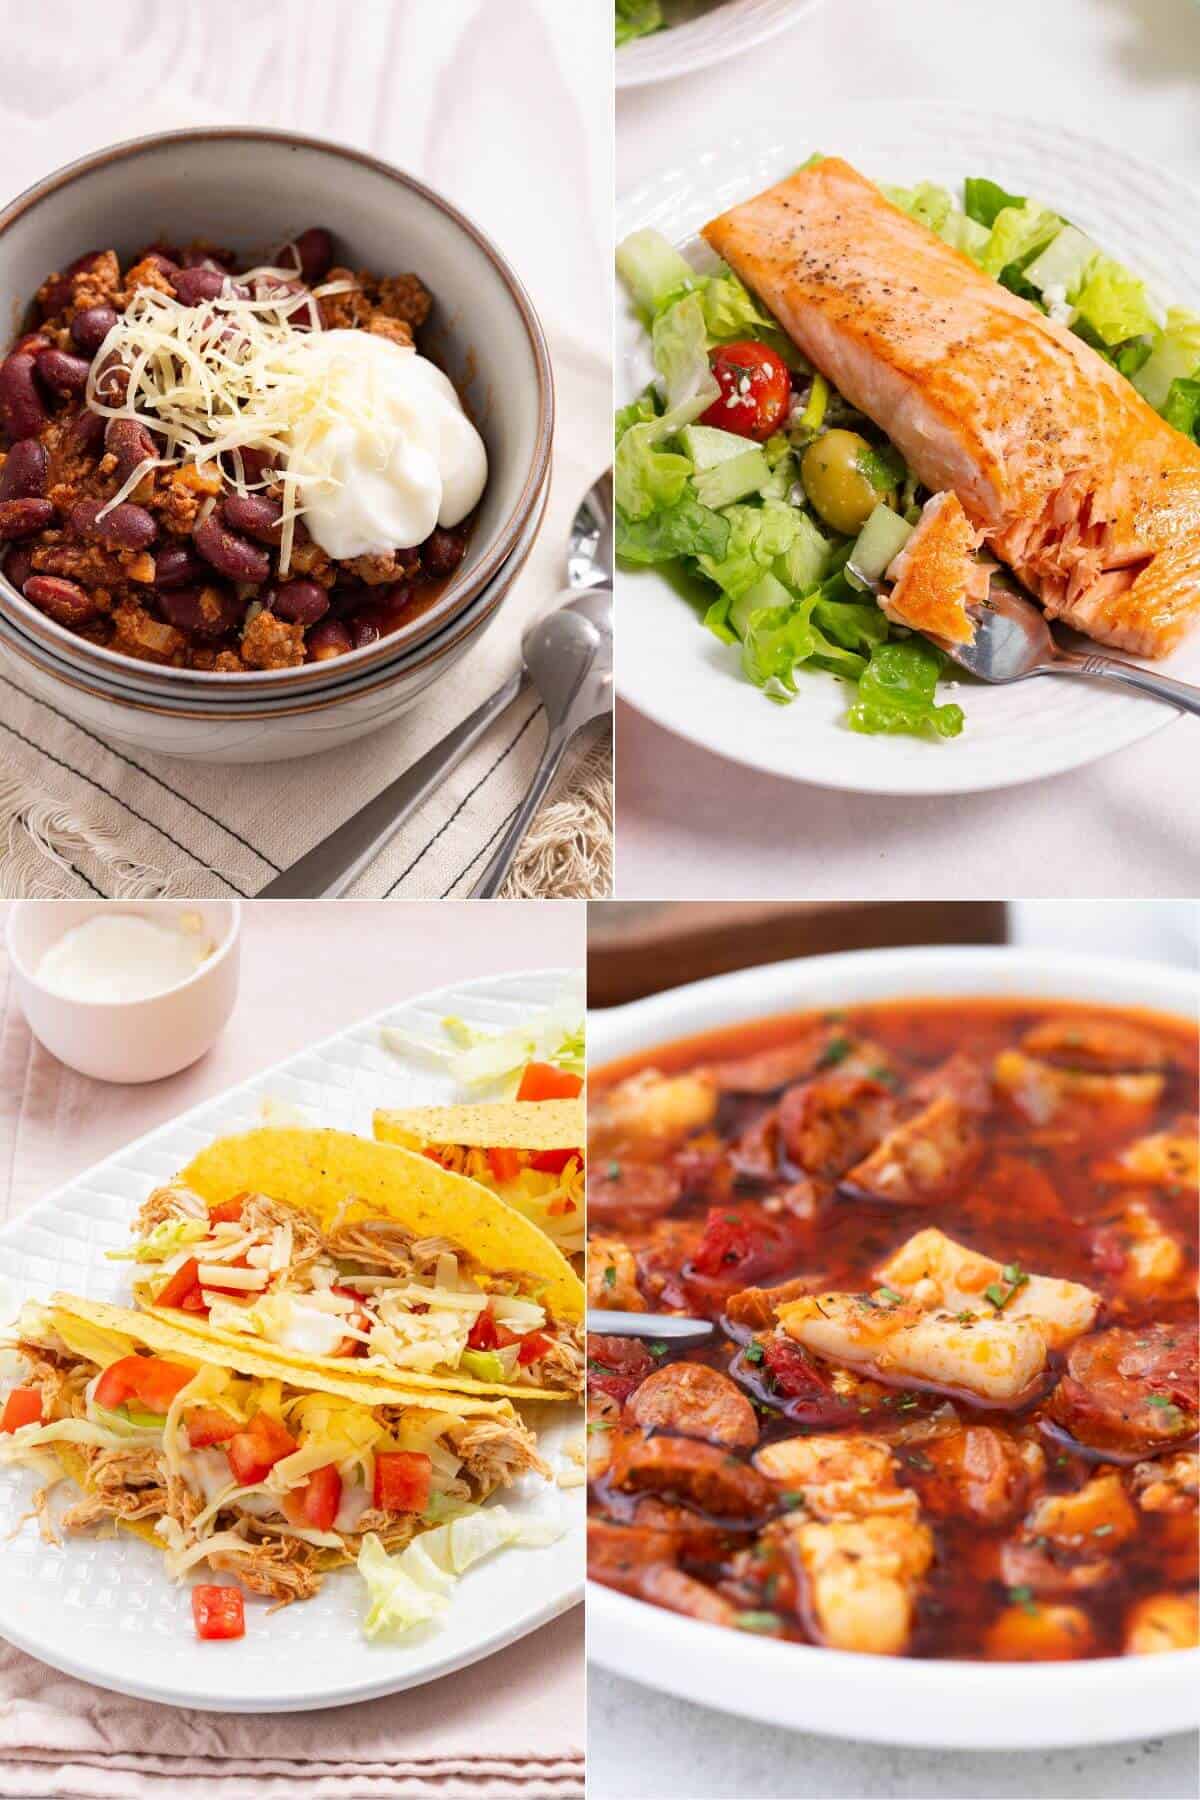 A collage of four easy, no-gluten meals you actually have to try, including a bowl of chili with cheese and sour cream, grilled salmon over a green salad, tacos filled with shredded meat and